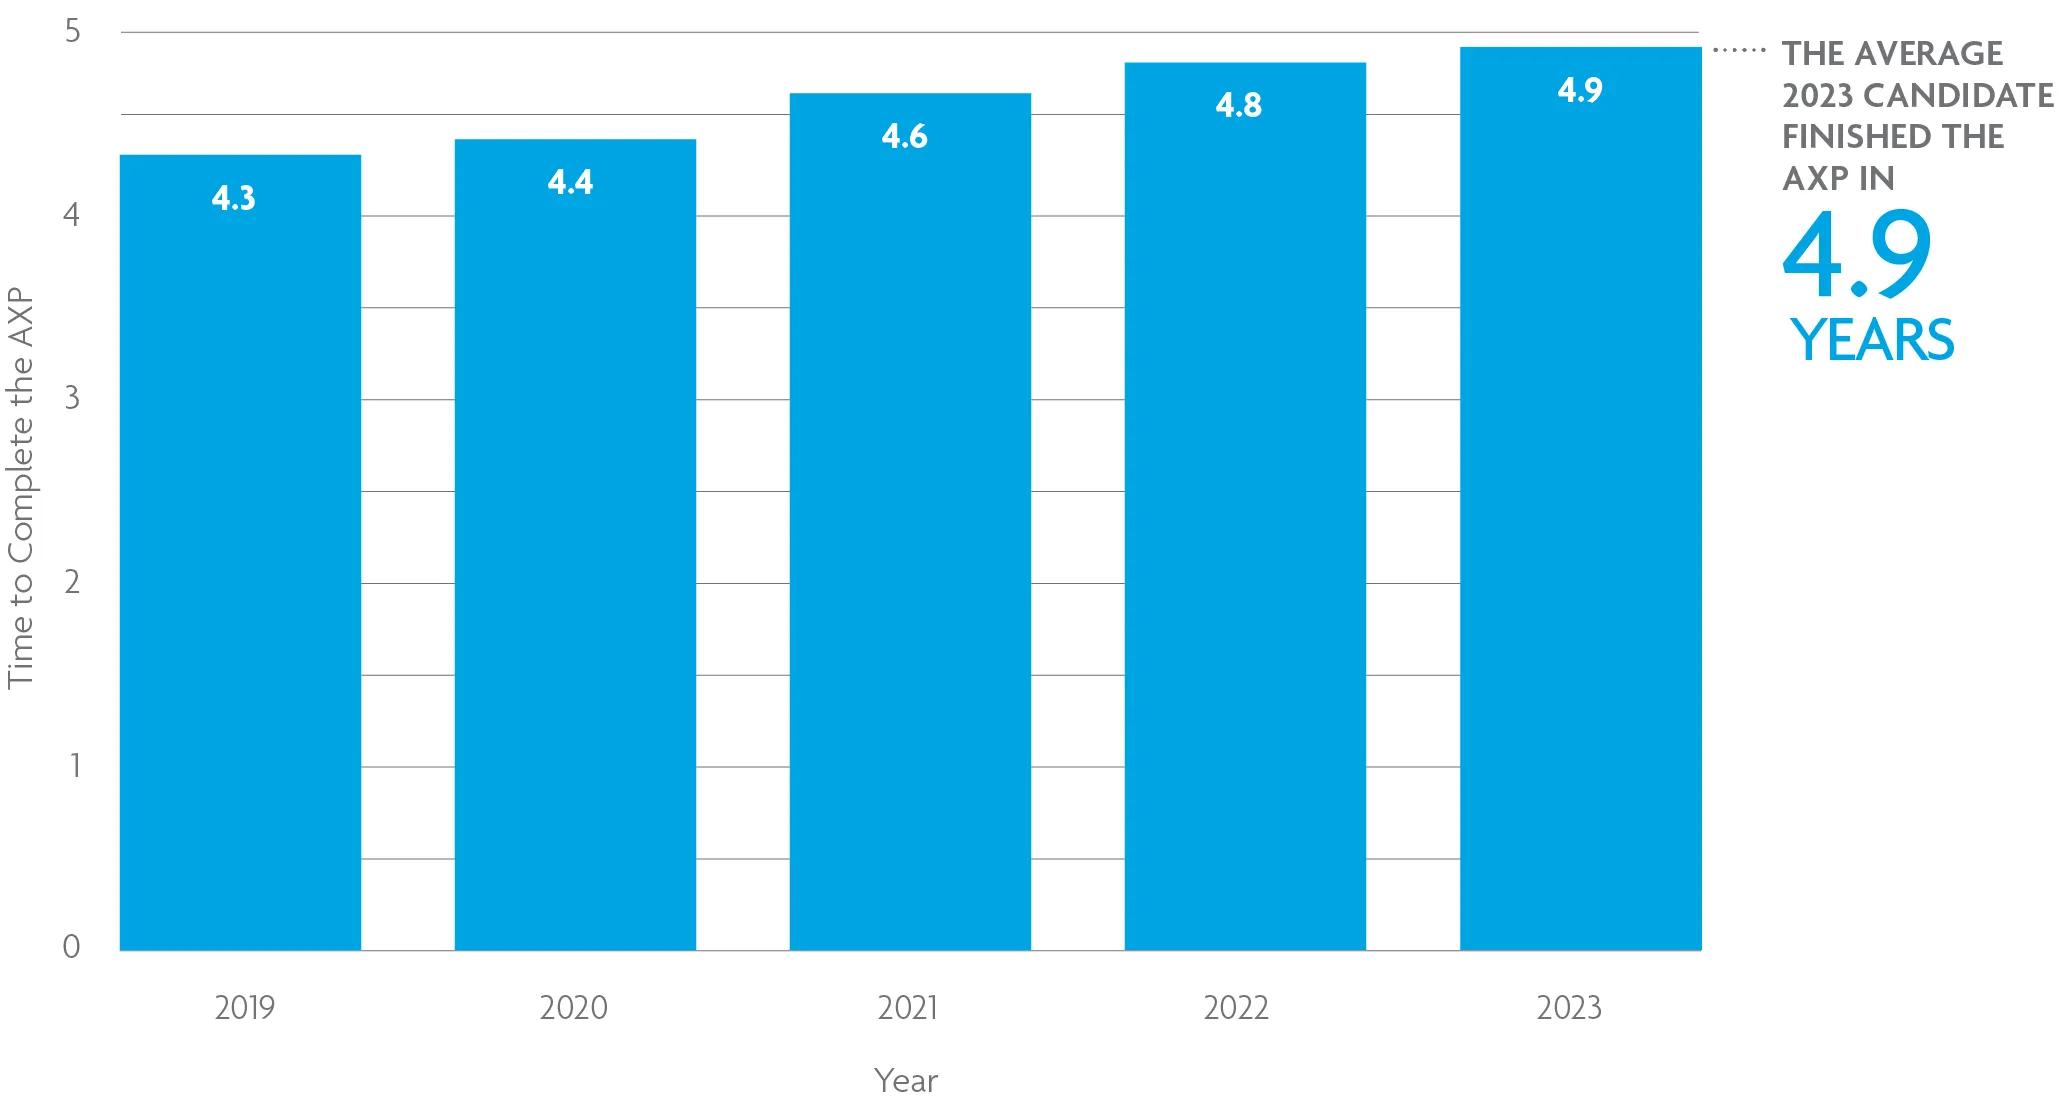 A bar chart shows that it took an average of 4.9 years to complete the AXP in 2023. For help with data accessibility, contact communications@ncarb.org.